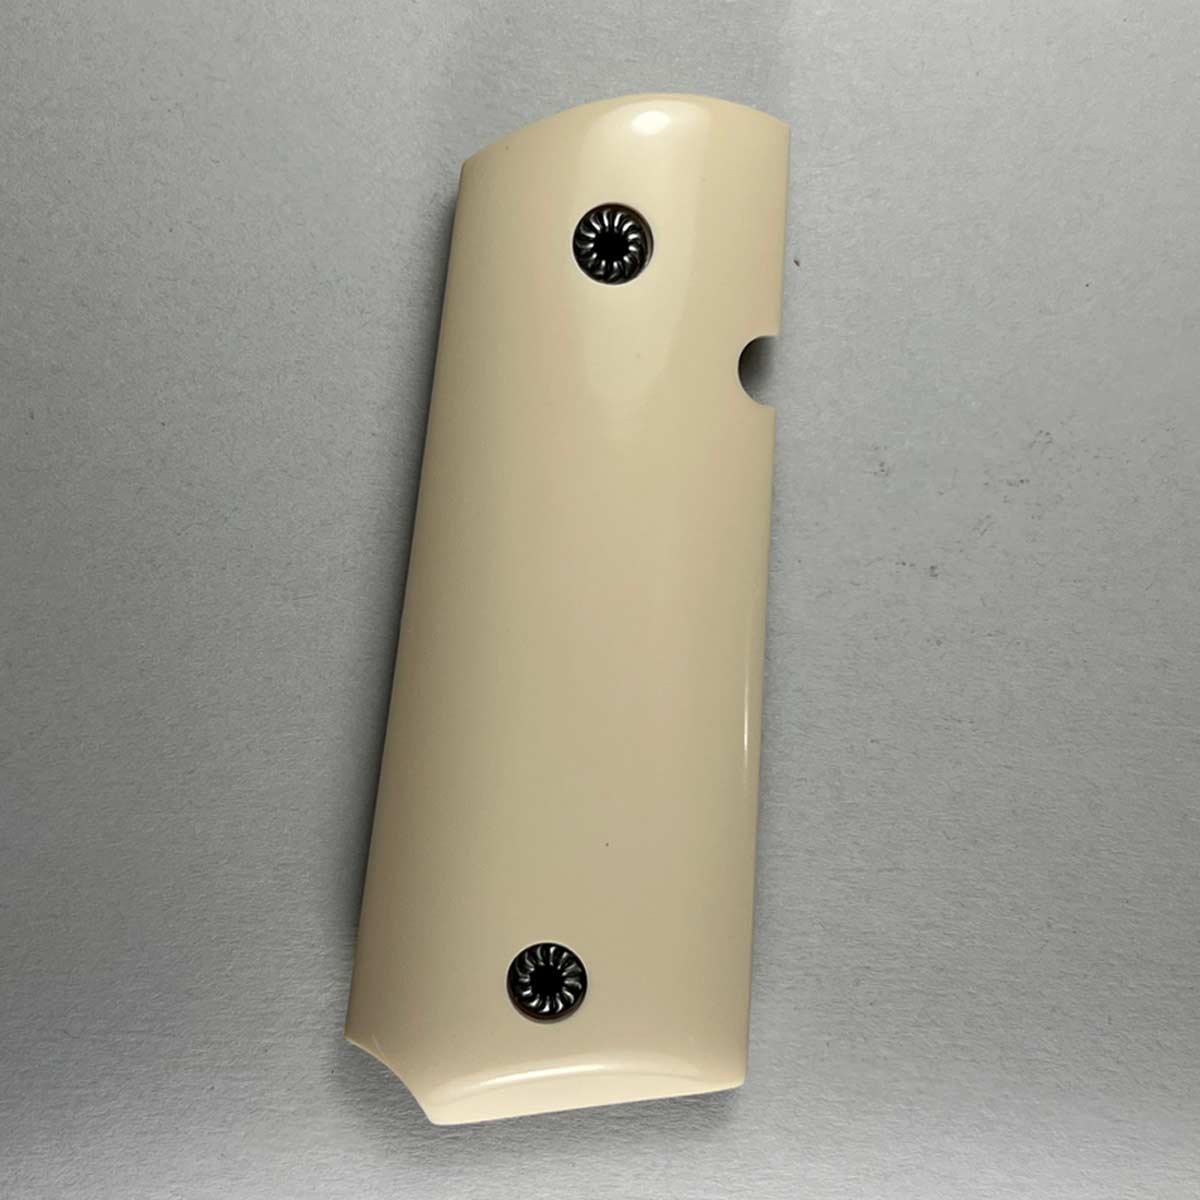 1911 Simulated Ivory COMPACT Model Pistol Grips OUT OF STOCK